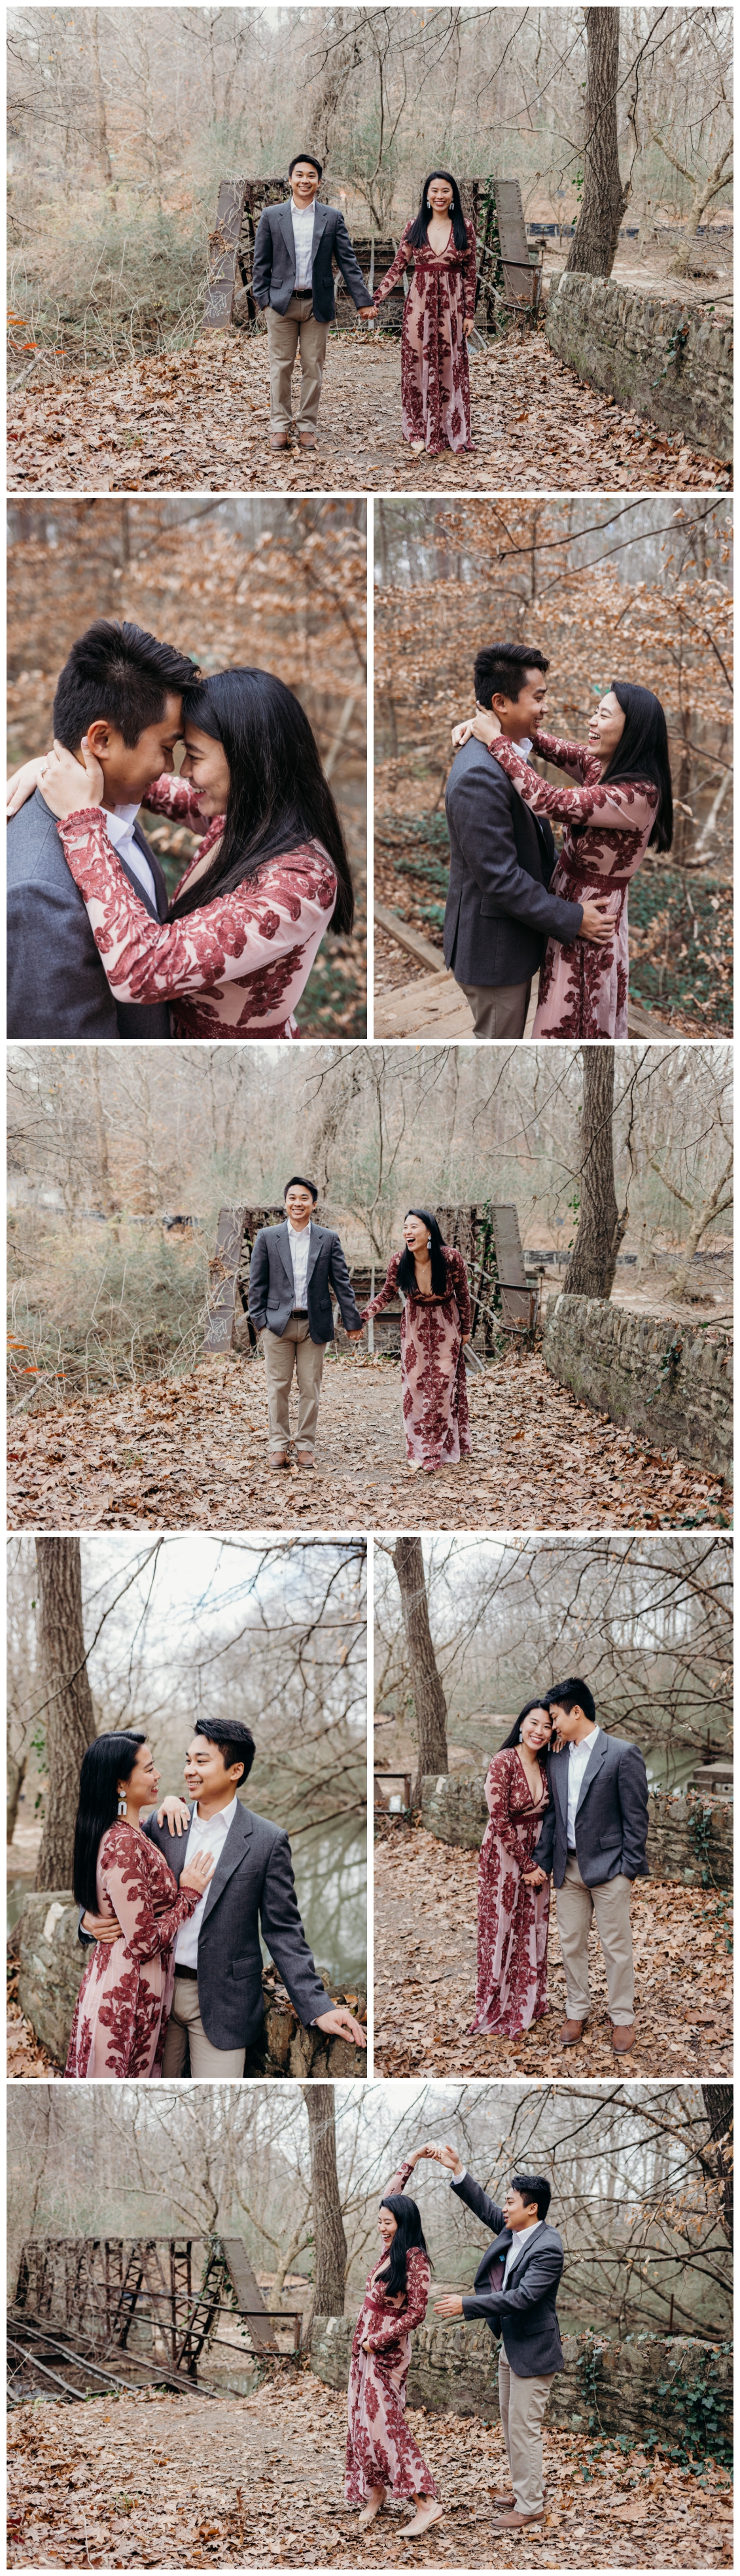 Fun lively engagement photos in Decatur GA